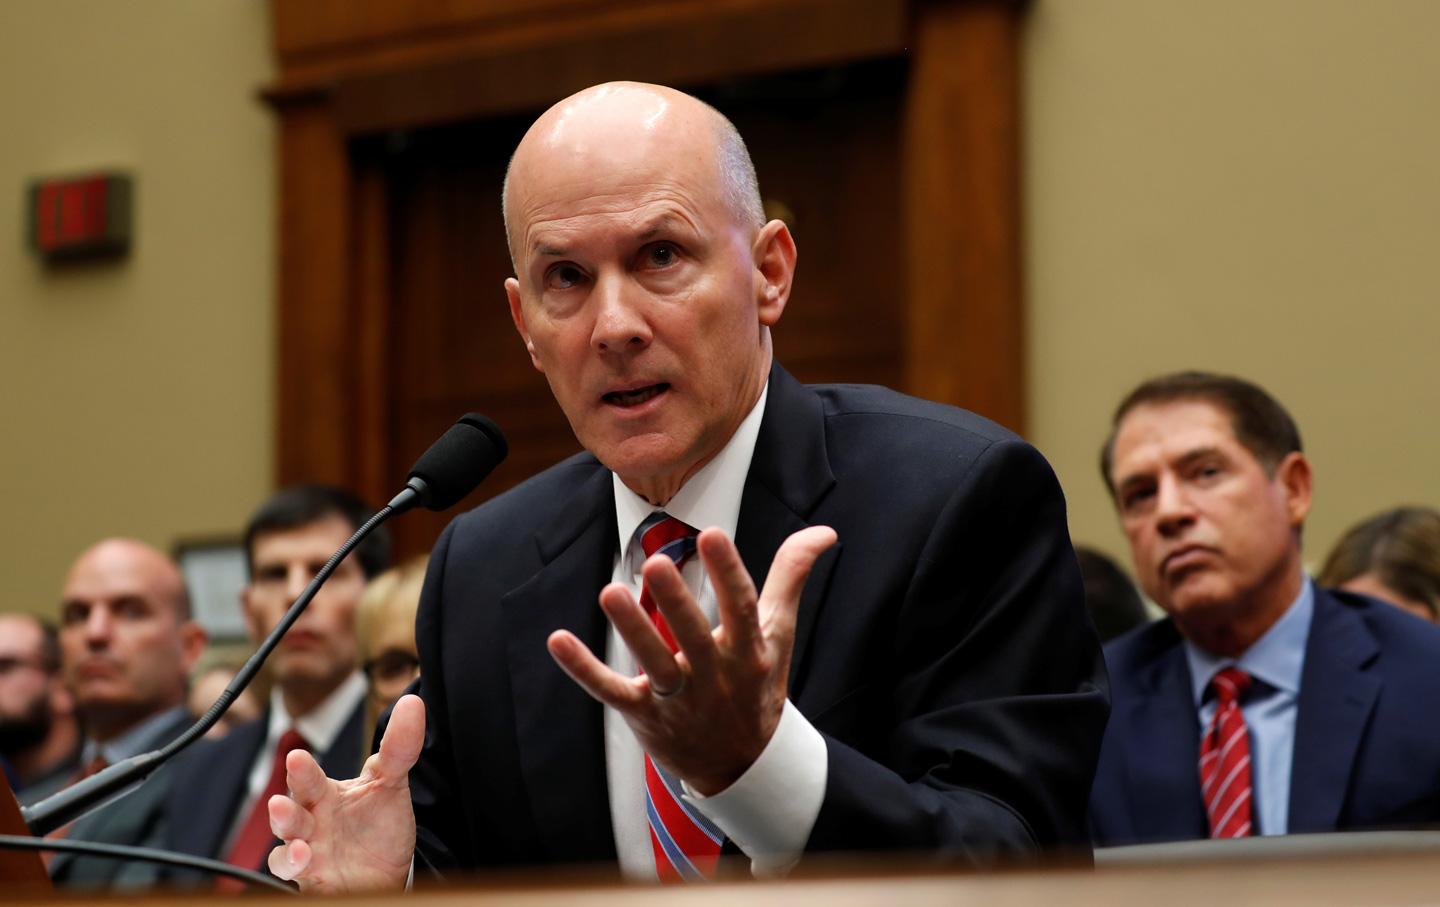 The Equifax Apology Tour Is an Insulting Charade